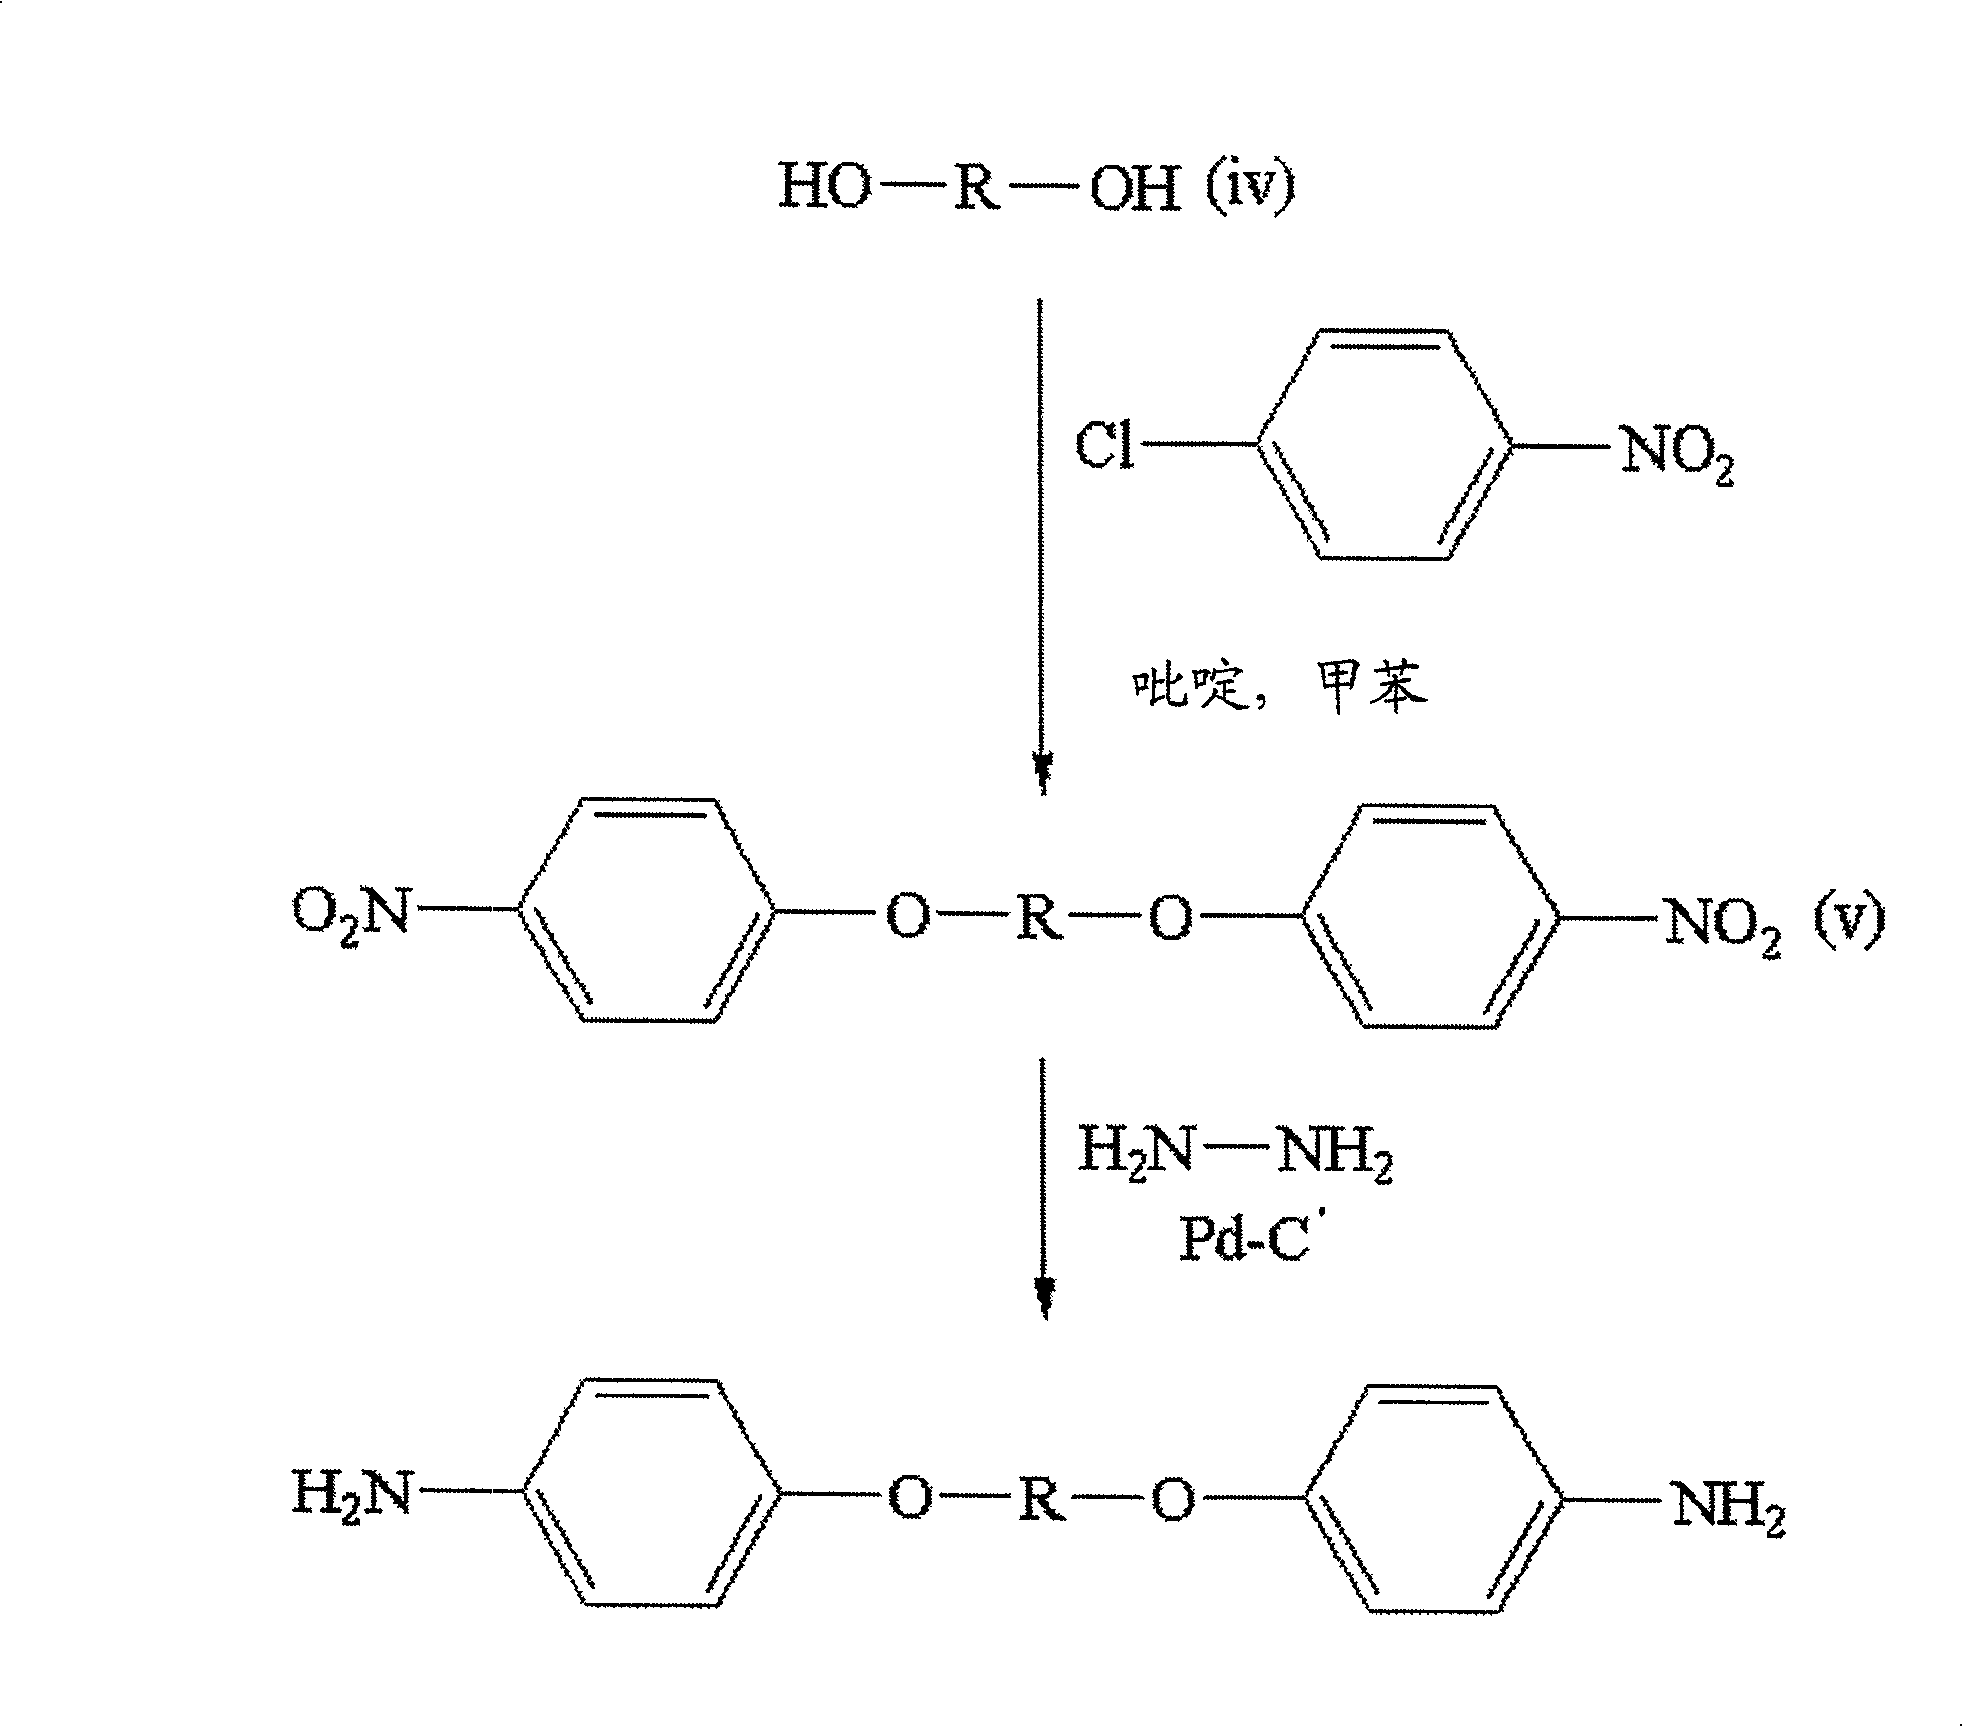 Diamine, polyamic acid and polyimide produced with the same